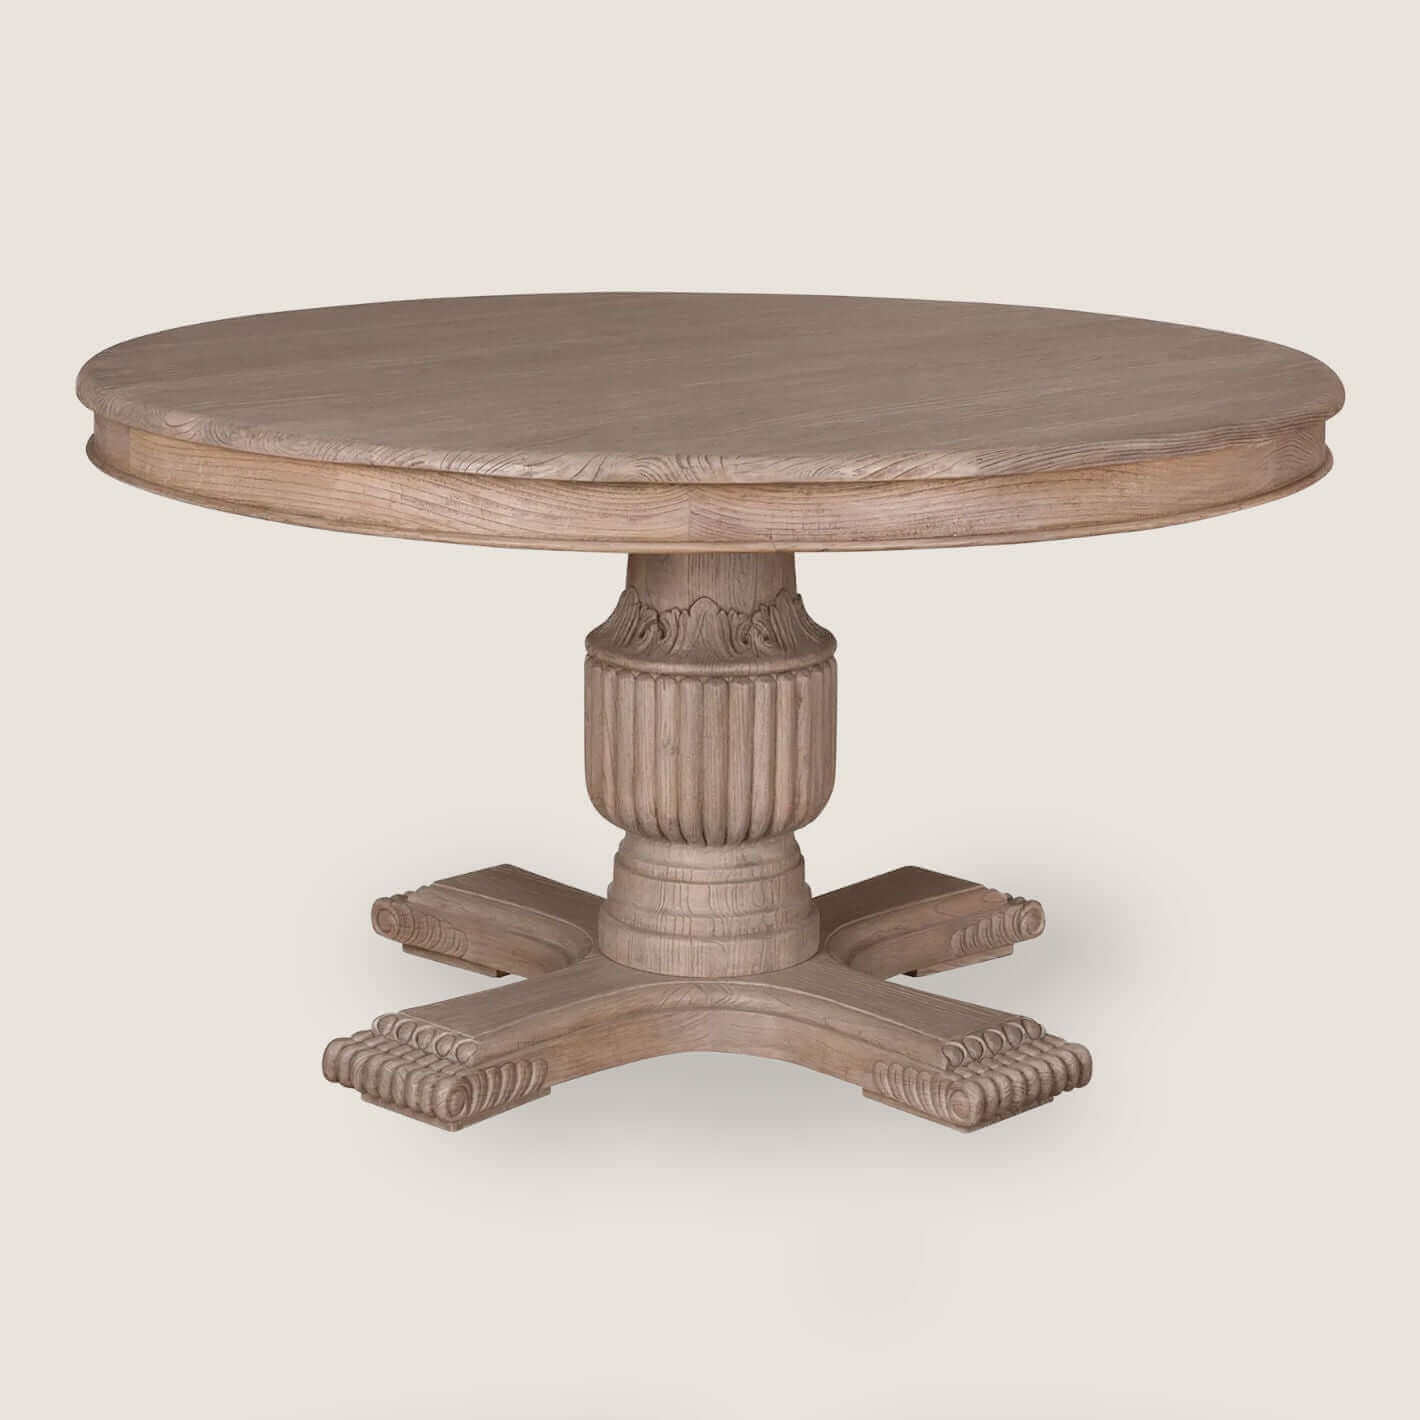 Buckfast Round Dining Table - Rustic Brown